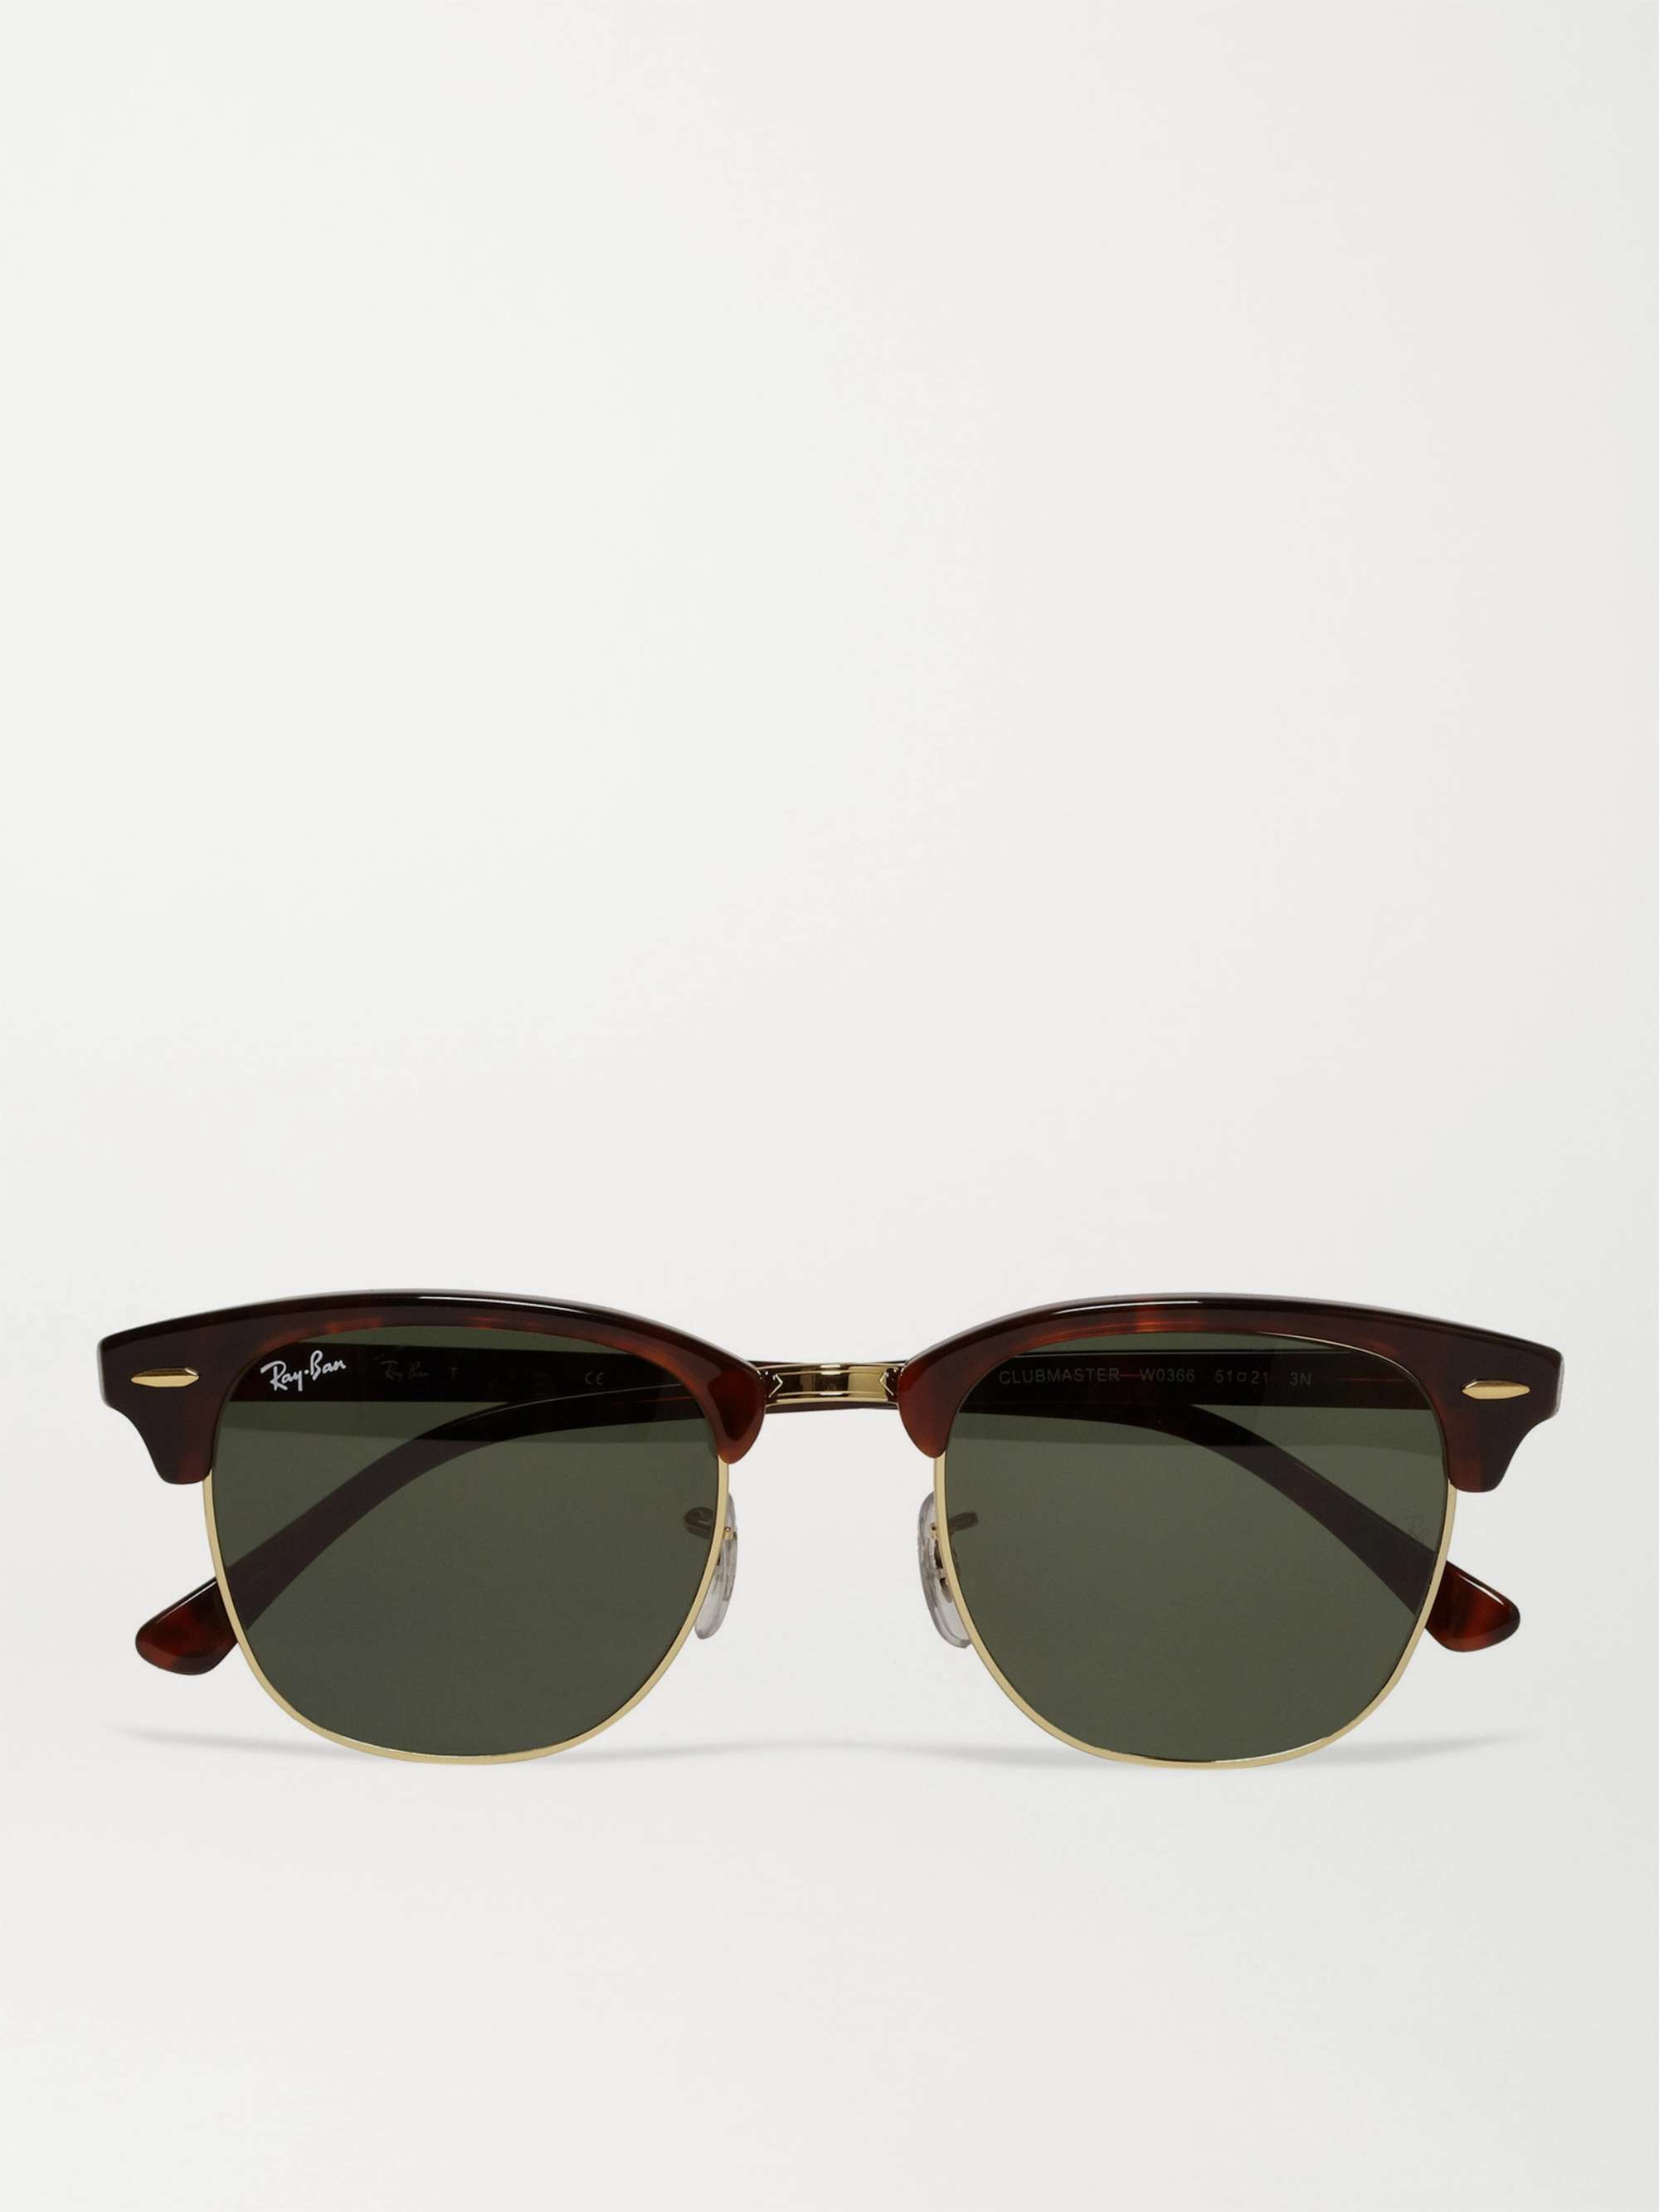 RAY-BAN Clubmaster Acetate and Gold-Tone Sunglasses